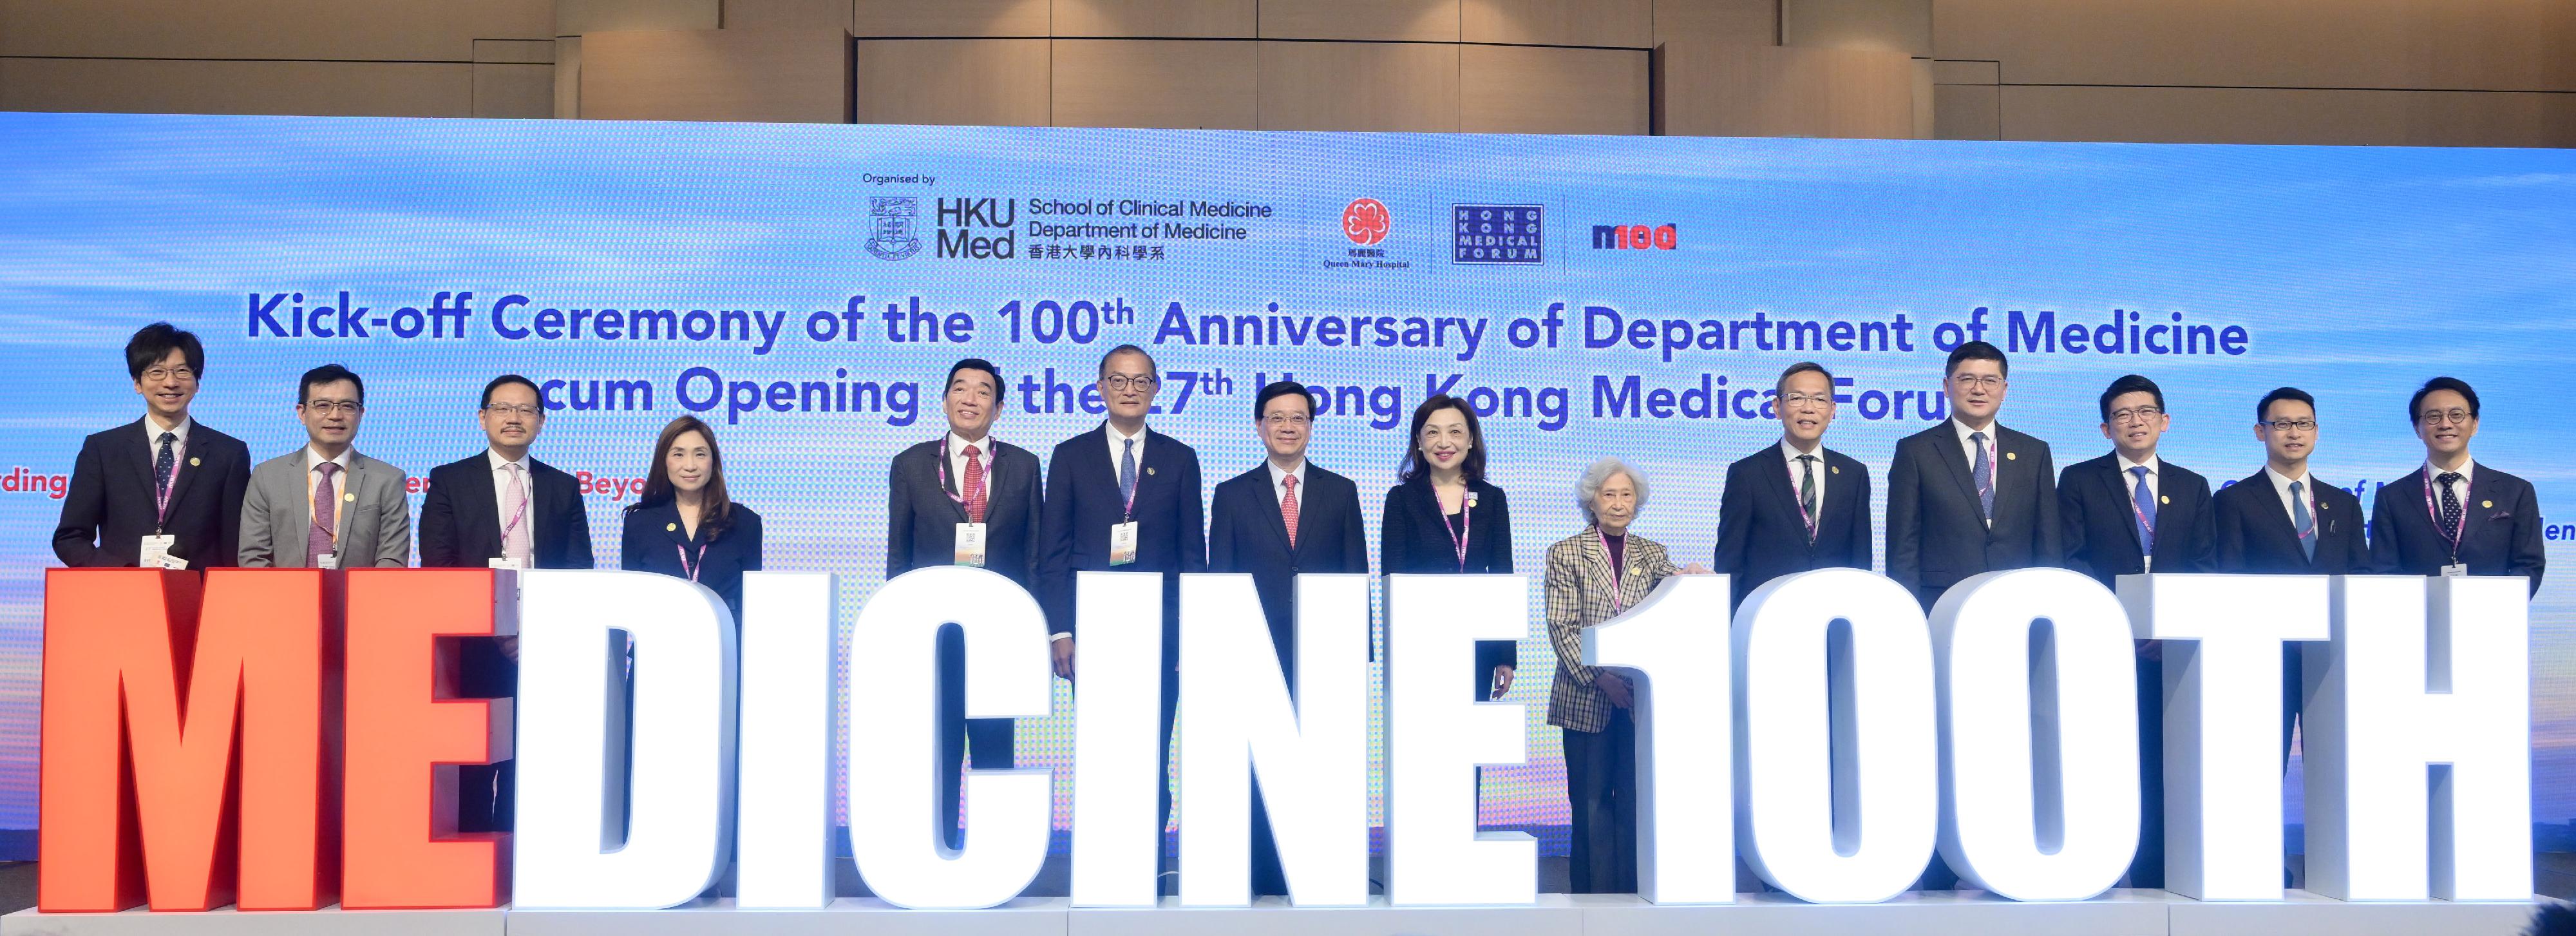 The Chief Executive, Mr John Lee, attended the Kick-off Ceremony of the 100th Anniversary of the Deparment of Medicine of the Li Ka Shing Faculty of Medicine of the University of Hong Kong cum the Opening of 27th Hong Kong Medical Forum today (May 13). Photo shows Mr Lee (seventh left); the Secretary for Health, Professor Lo Chung-mau (sixth left); the Chairman of the University of Hong Kong (HKU) Council, Ms Priscilla Wong (seventh right); the Emeritus Professor and Honorary Clinical Professor of the Department of Medicine of the School of Clinical Medicine of the Li Ka Shing Faculty of Medicine of the HKU, Professor Rosie Young (sixth right); the Dean of the Li Ka Shing Faculty of Medicine of the HKU, Professor Wallace Lau (fifth right); the Chairperson of the Department of Medicine of the School of Medicine of the Li Ka Shing Faculty of Medicine of the HKU, Professor Tse Hung-fat (third left), and other guests at the forum.